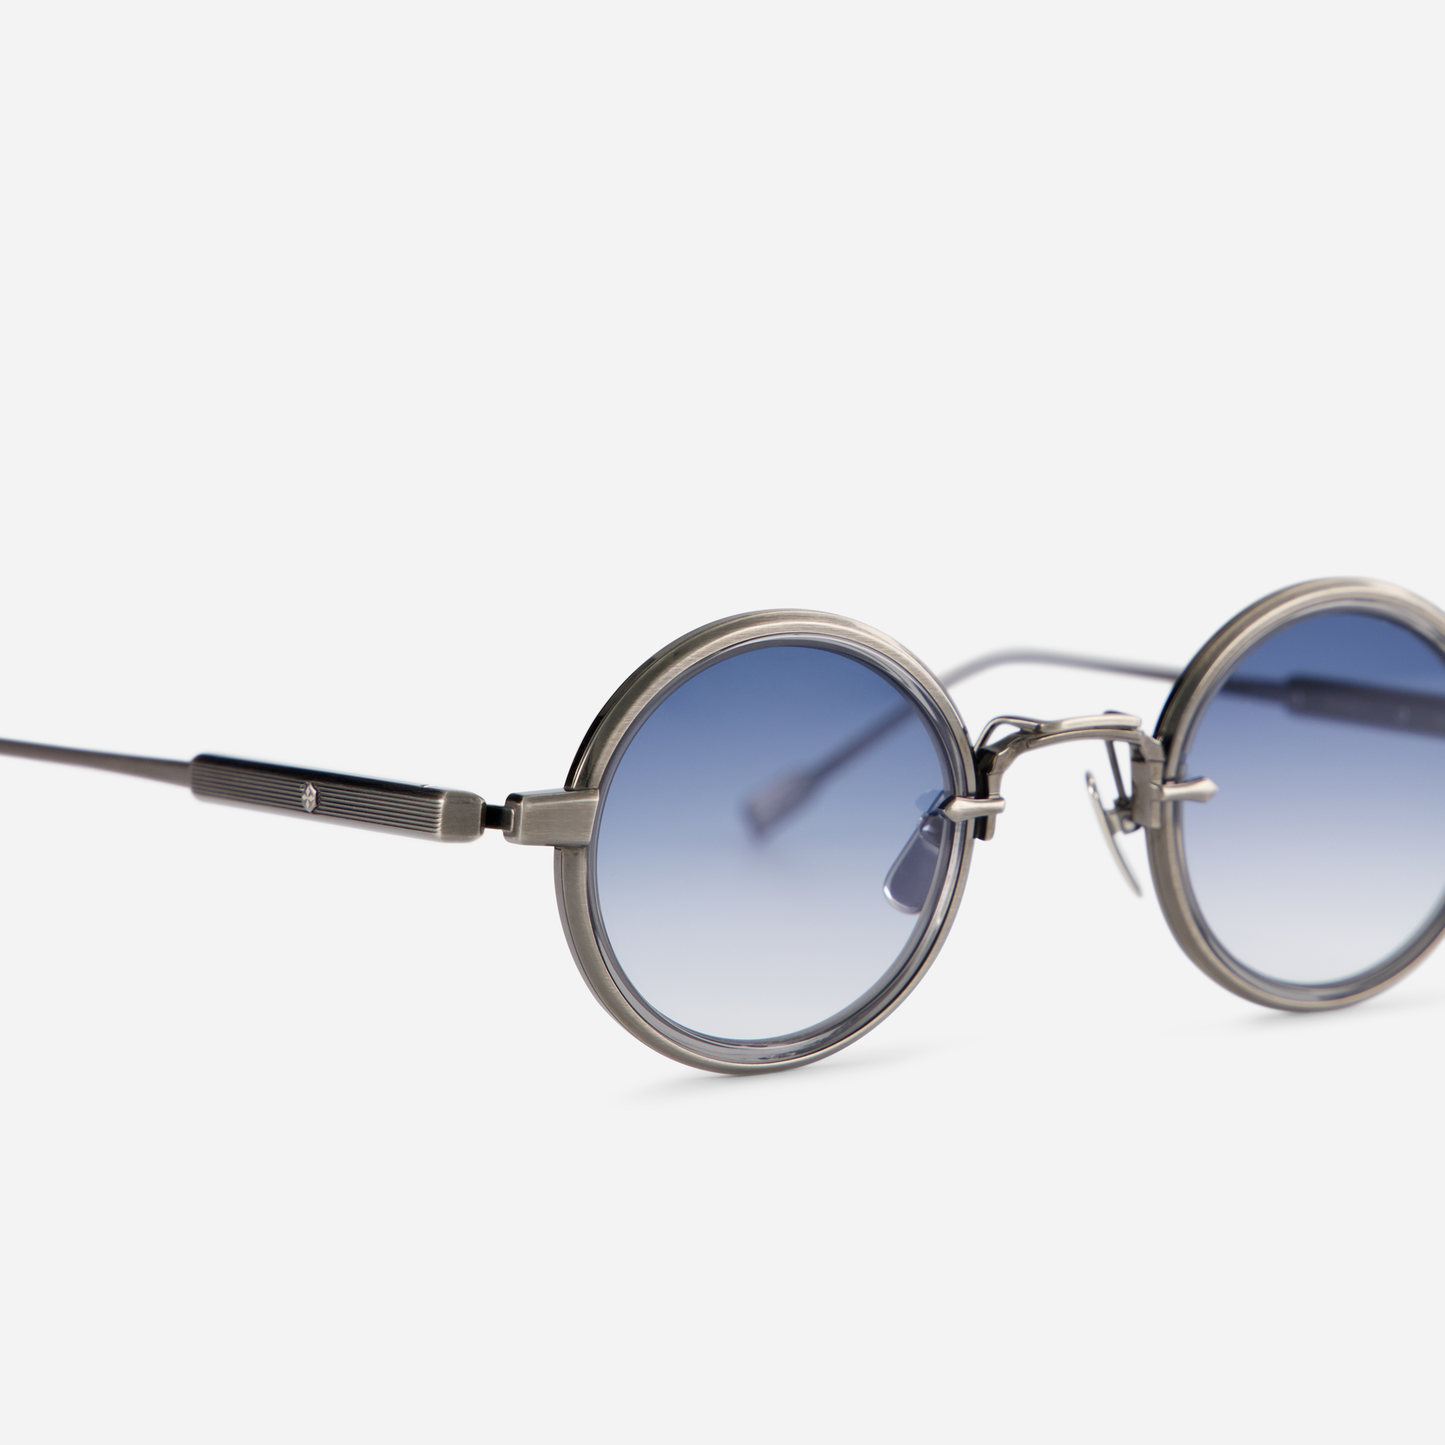 This eyewear, Rotanev-T AS-1, includes a titanium frame with an antique silver coating, a crystal grey takiron rim insert, and gradient blue lenses.